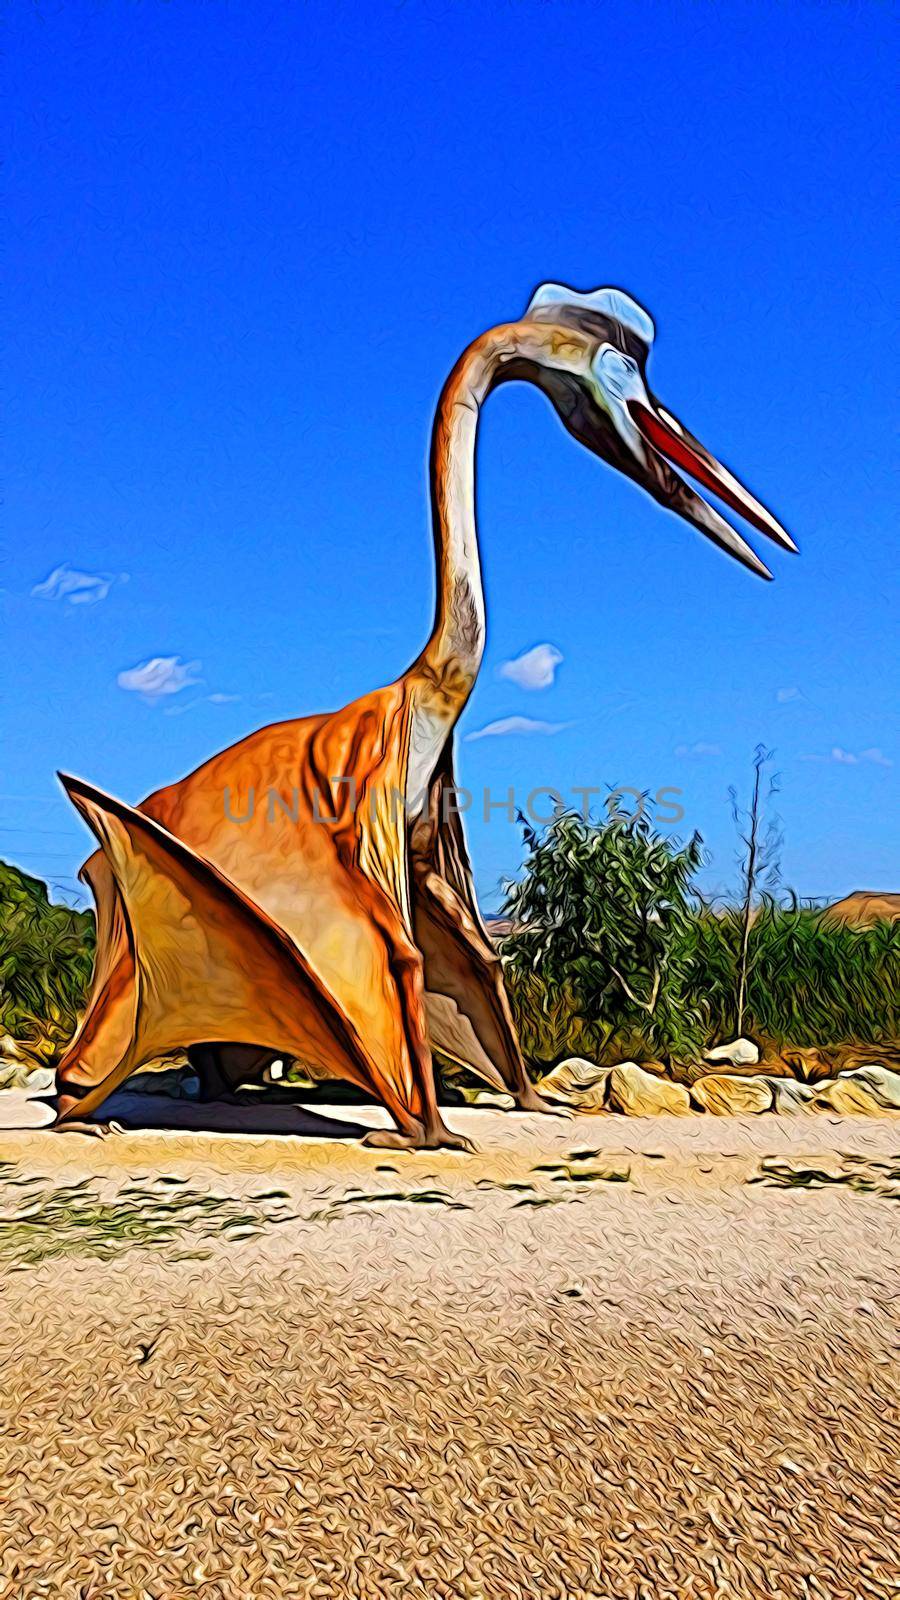 Digital color painting style representing a ptereodactyl wandering alone